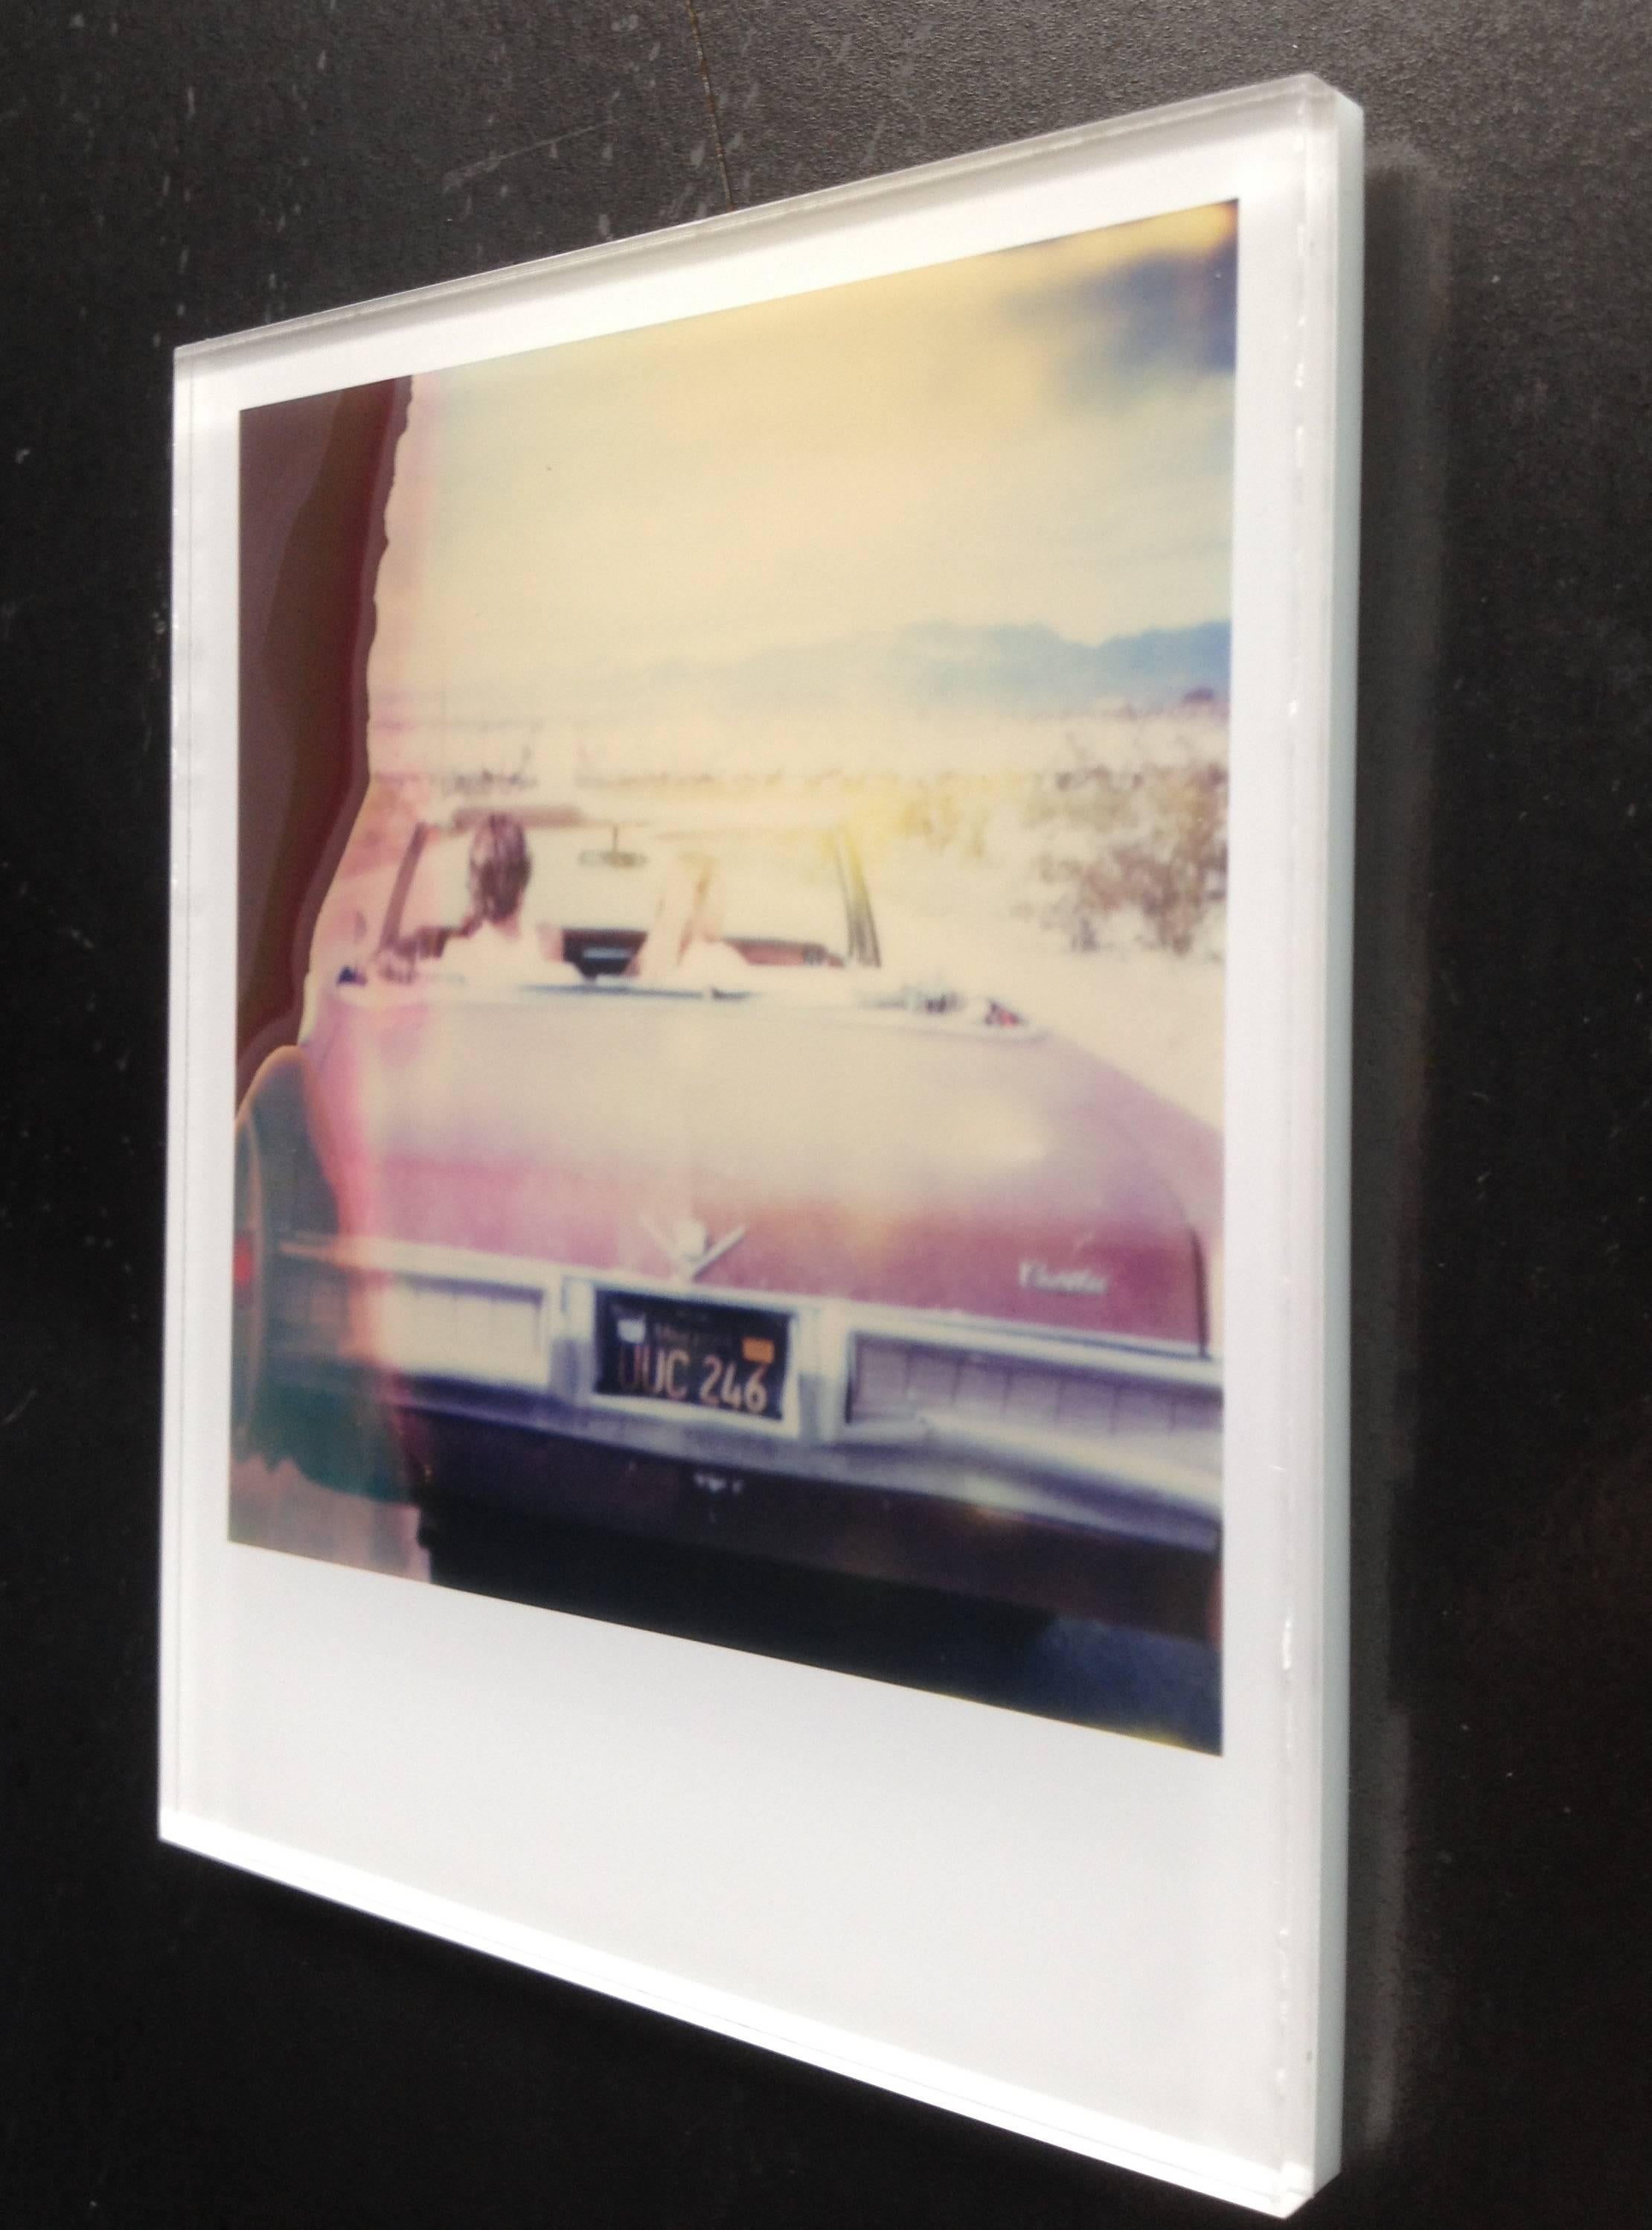 A Stefanie Schneider Mini, Original size Polaroid photograph sandwiched between plexiglass.
'The End' (Sidewinder), 2005
signed and signature brand on verso
Lambda digital Color Photographs based on a Polaroid

Polaroid sized open Editions